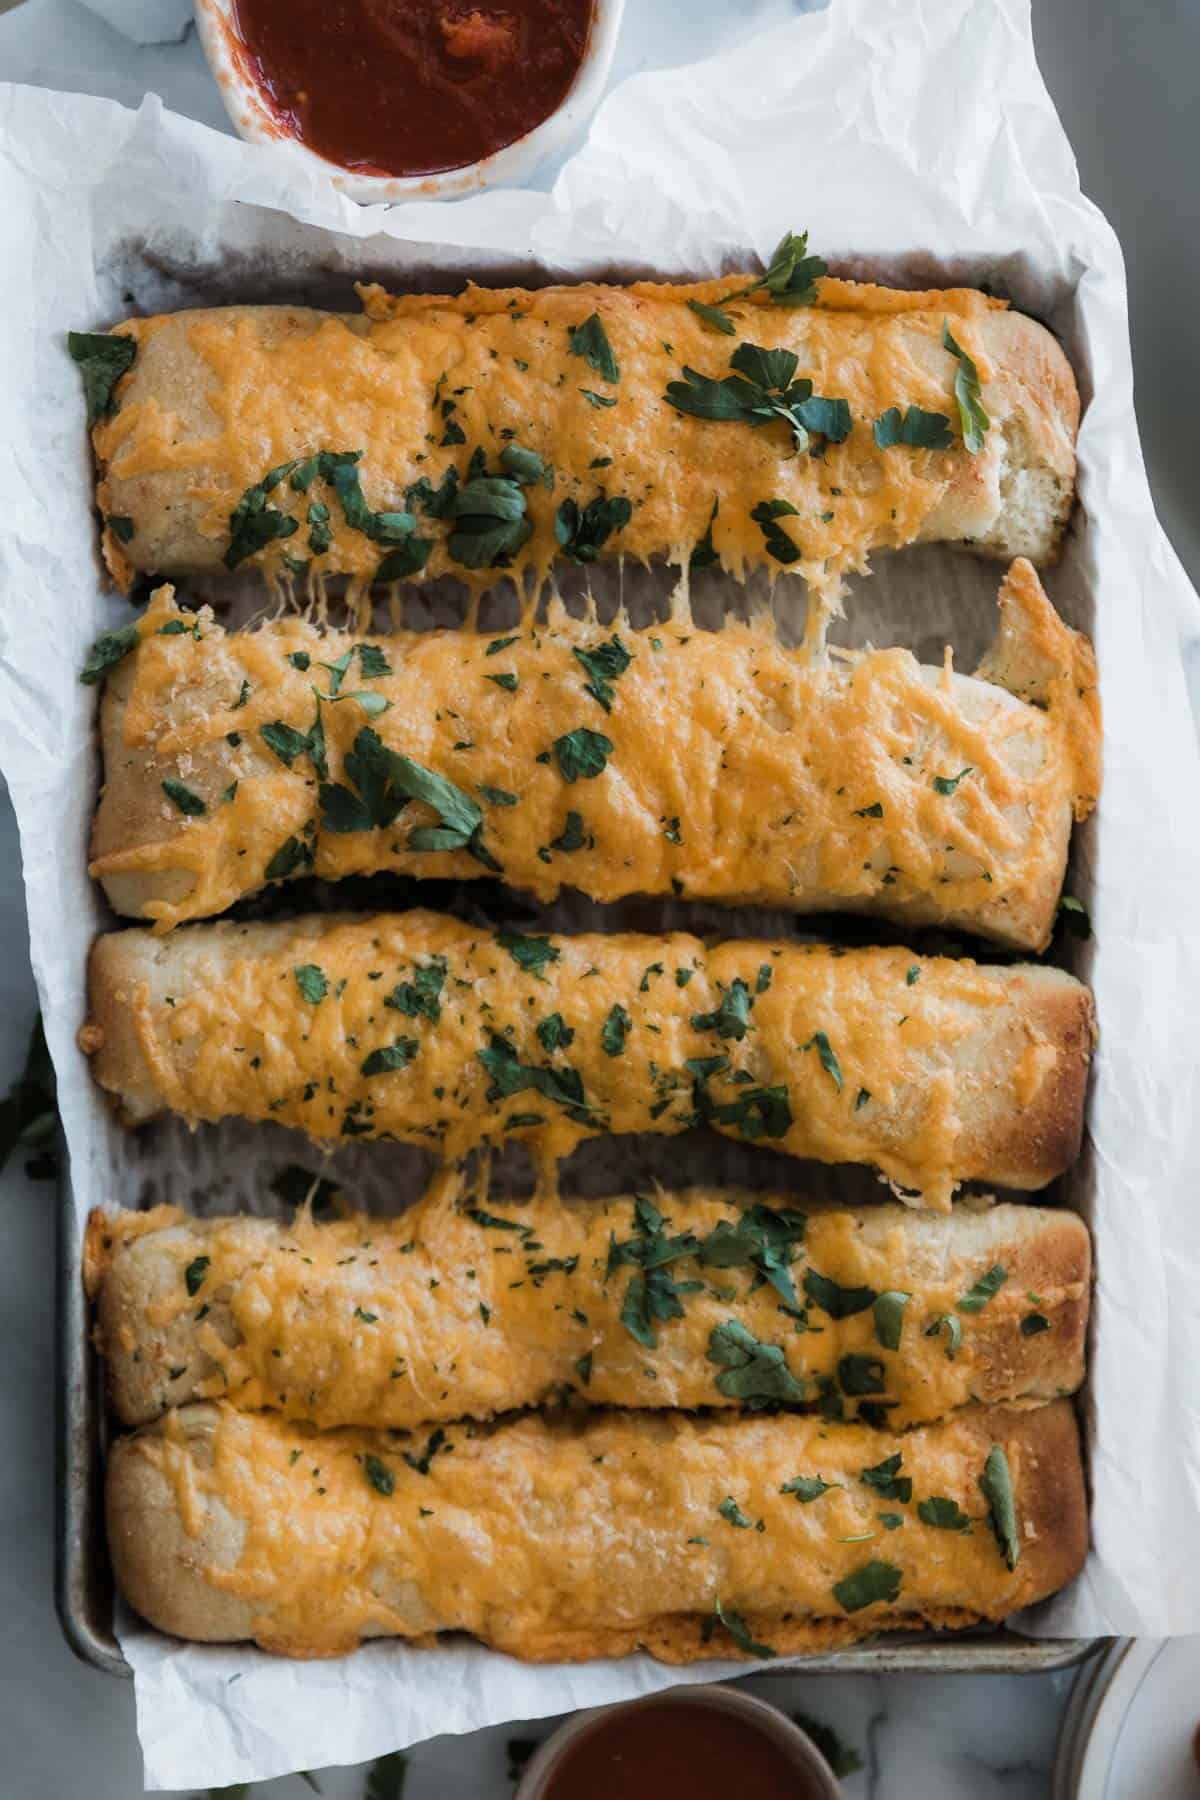 Five cheesy breadsticks with parsley and cup of marinara.